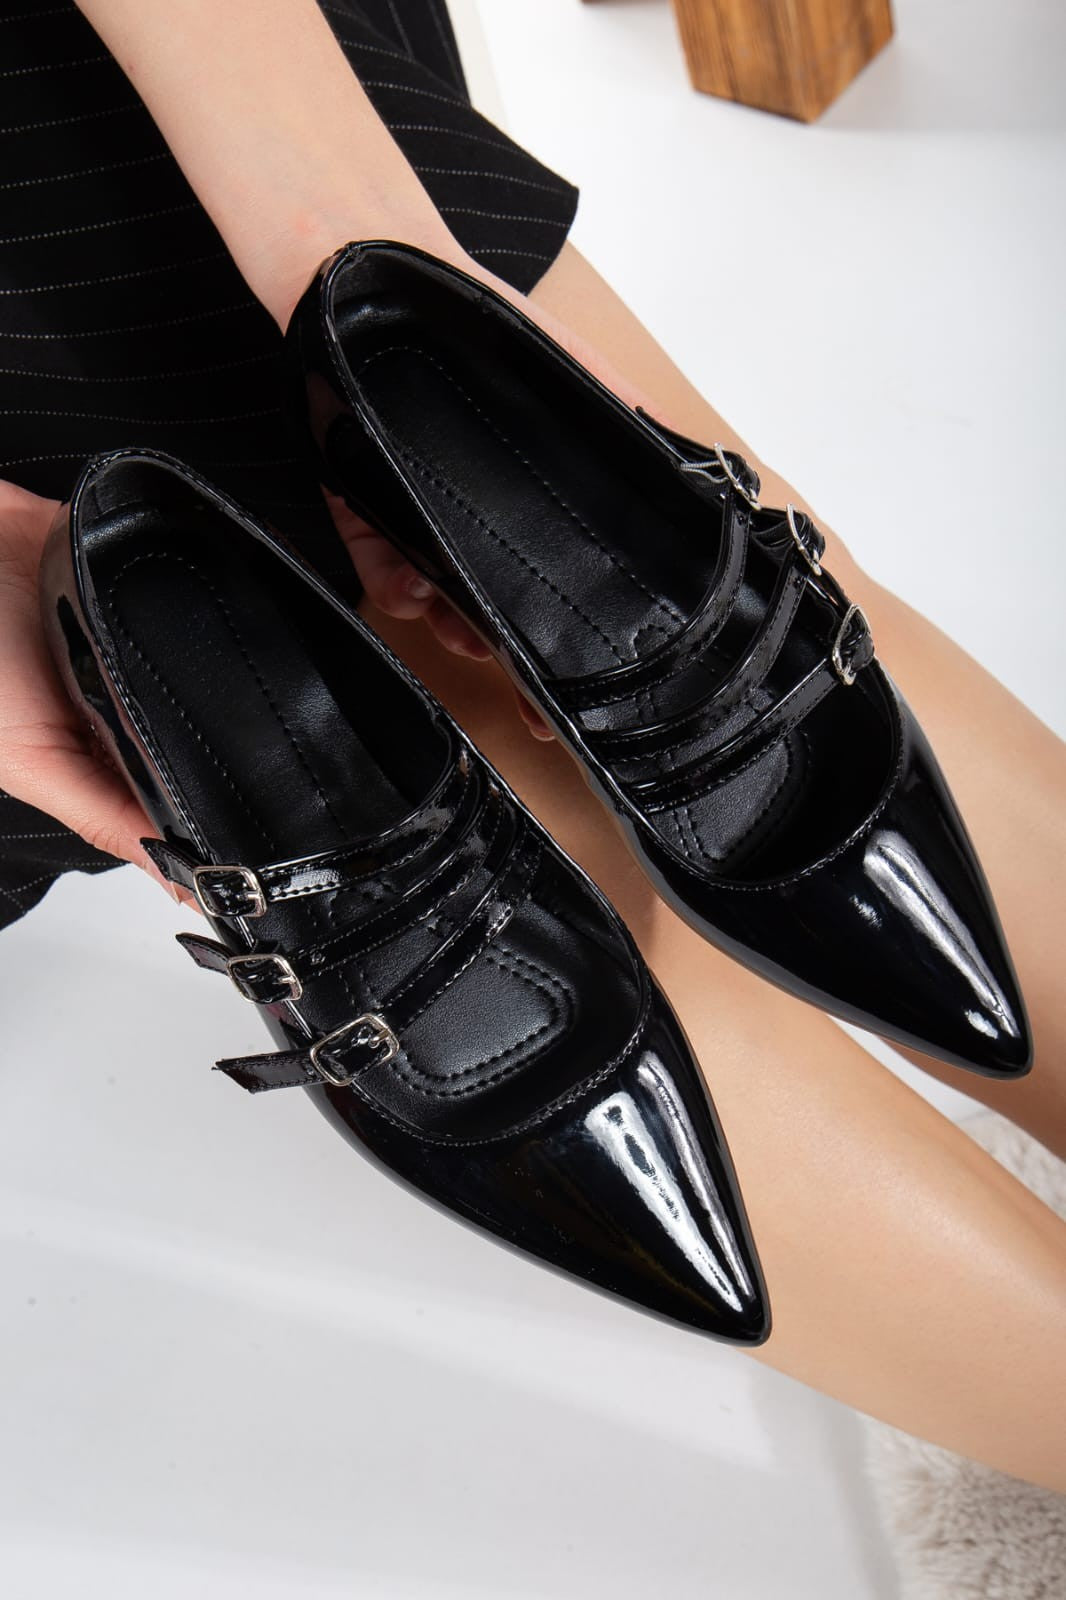 Women's Hoppe Black Patent Leather Ballerina Shoes - STREETMODE™